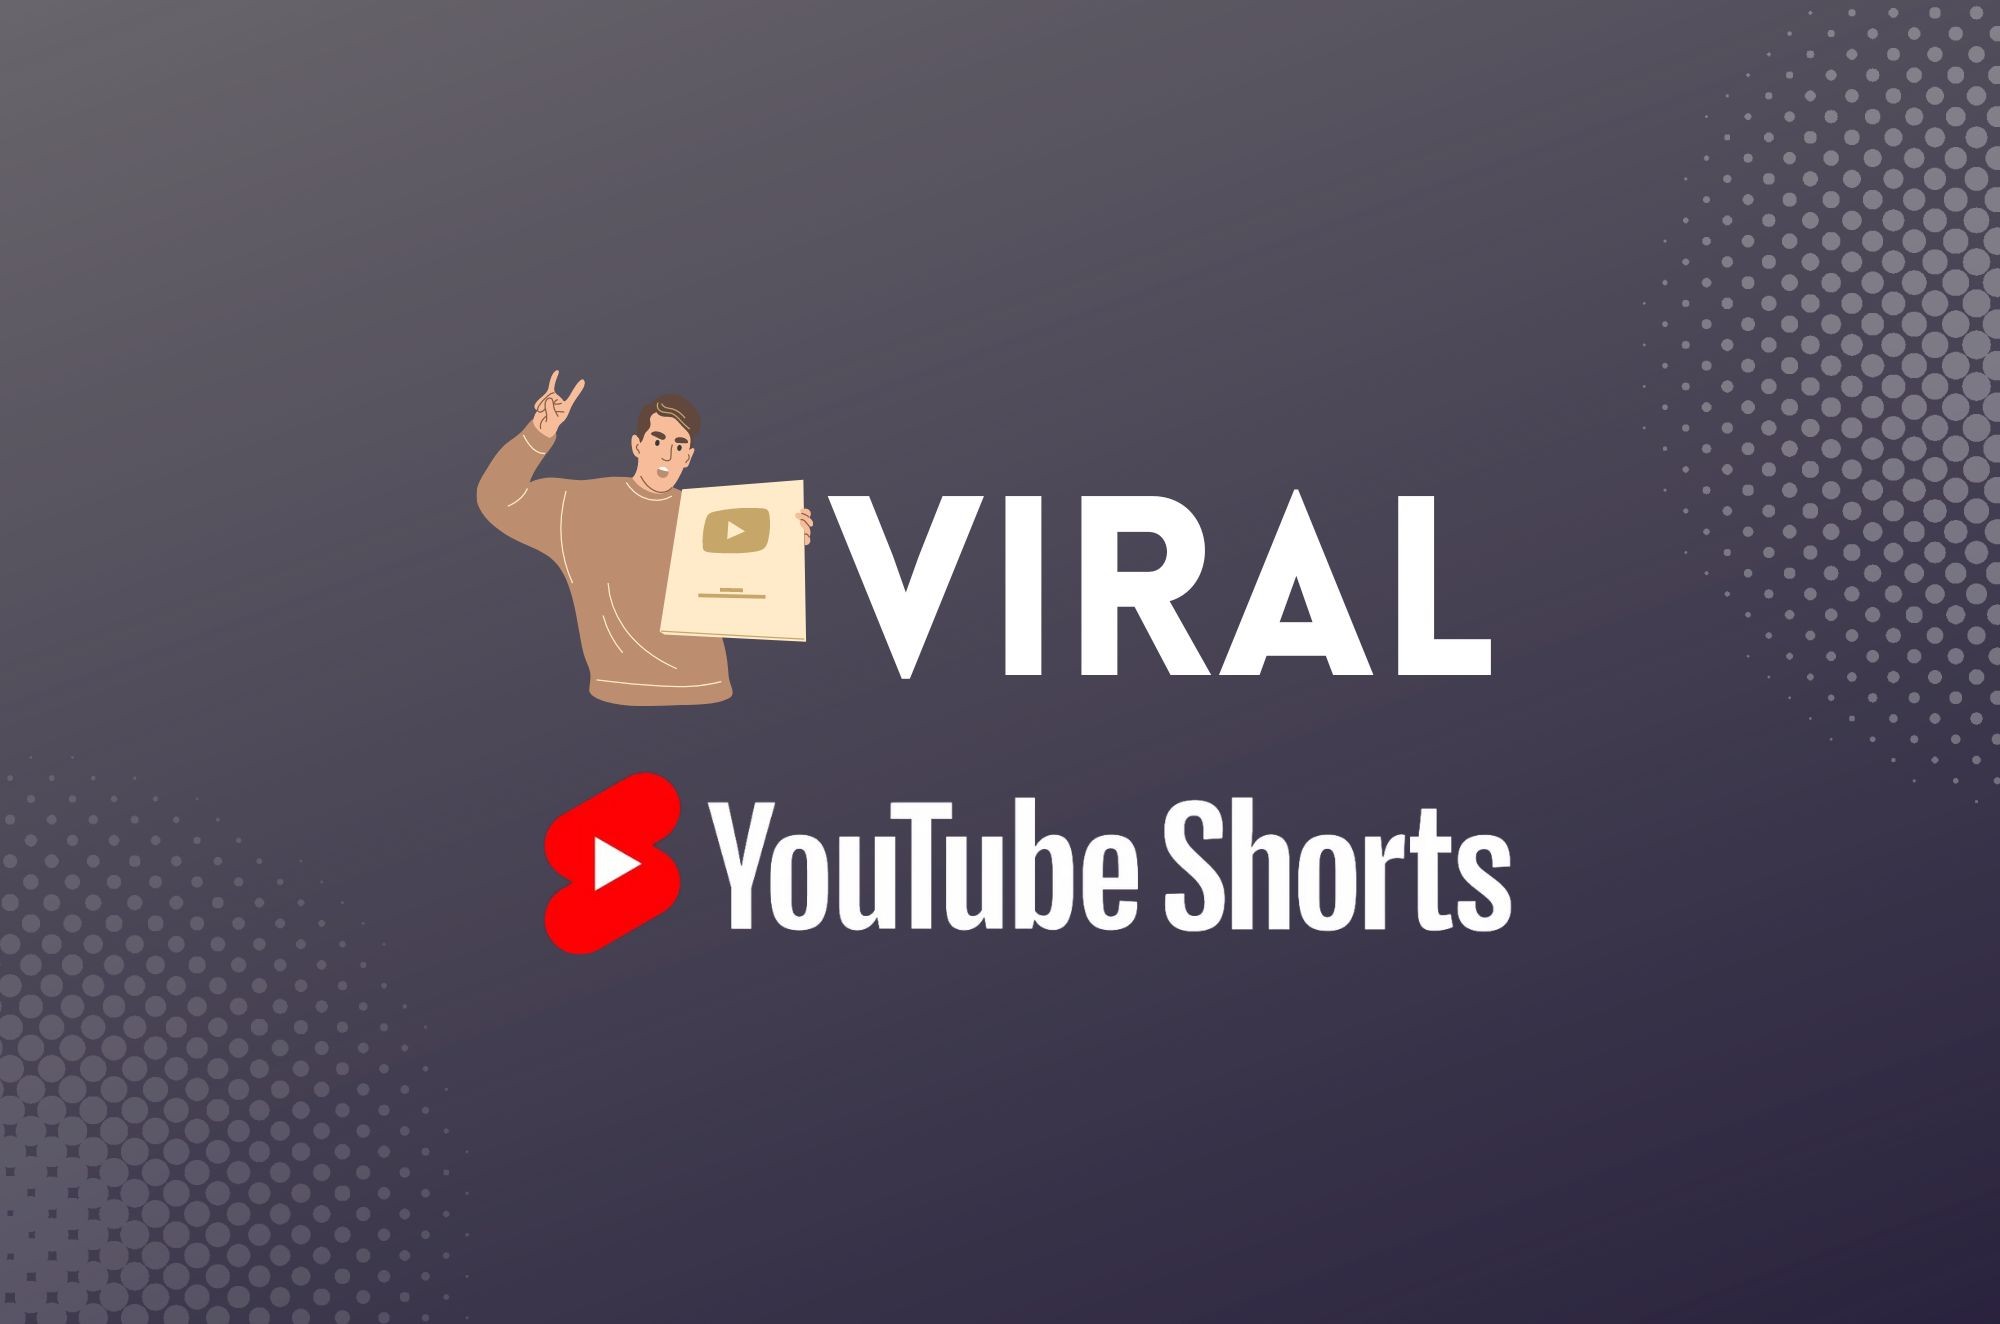 How to Make YouTube Shorts Go Viral